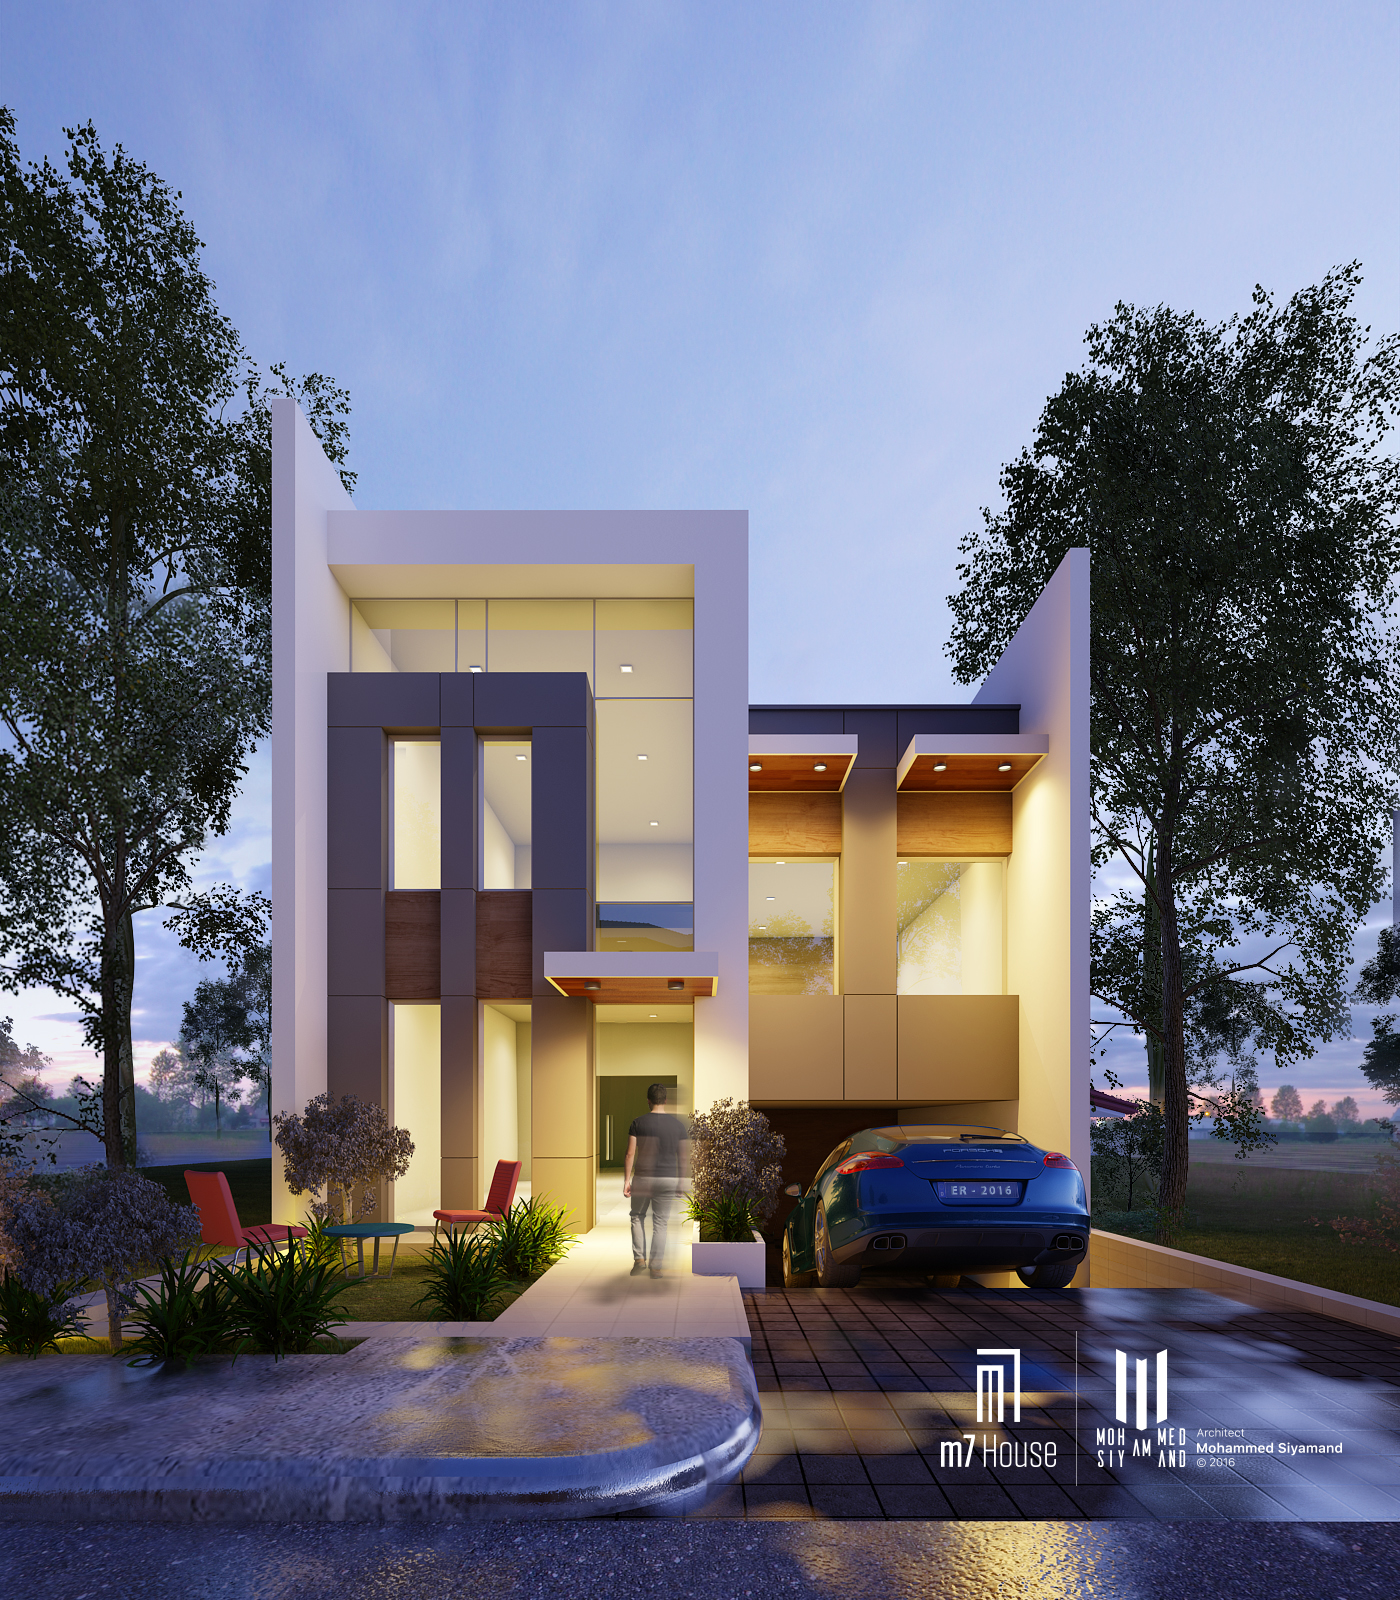 m7 house Elevation small house facade design modern simple Render visualization 7.5m elevation HOUSE DESIGN smal plan 3D